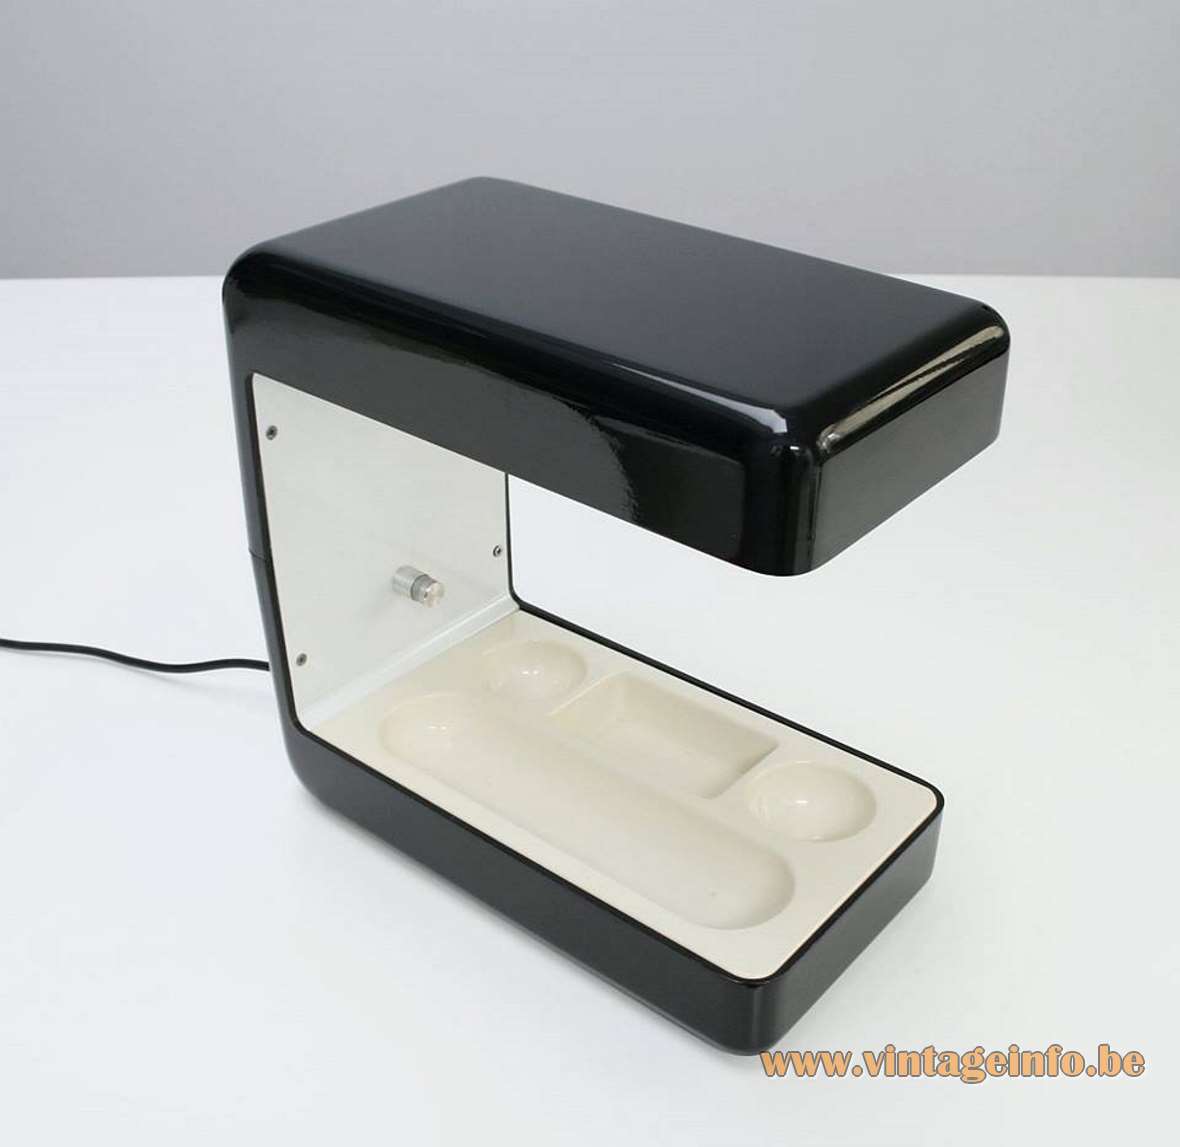 Giotto Stoppino Isos desk lamp in black and white aluminium produced in the 1970s by Tronconi